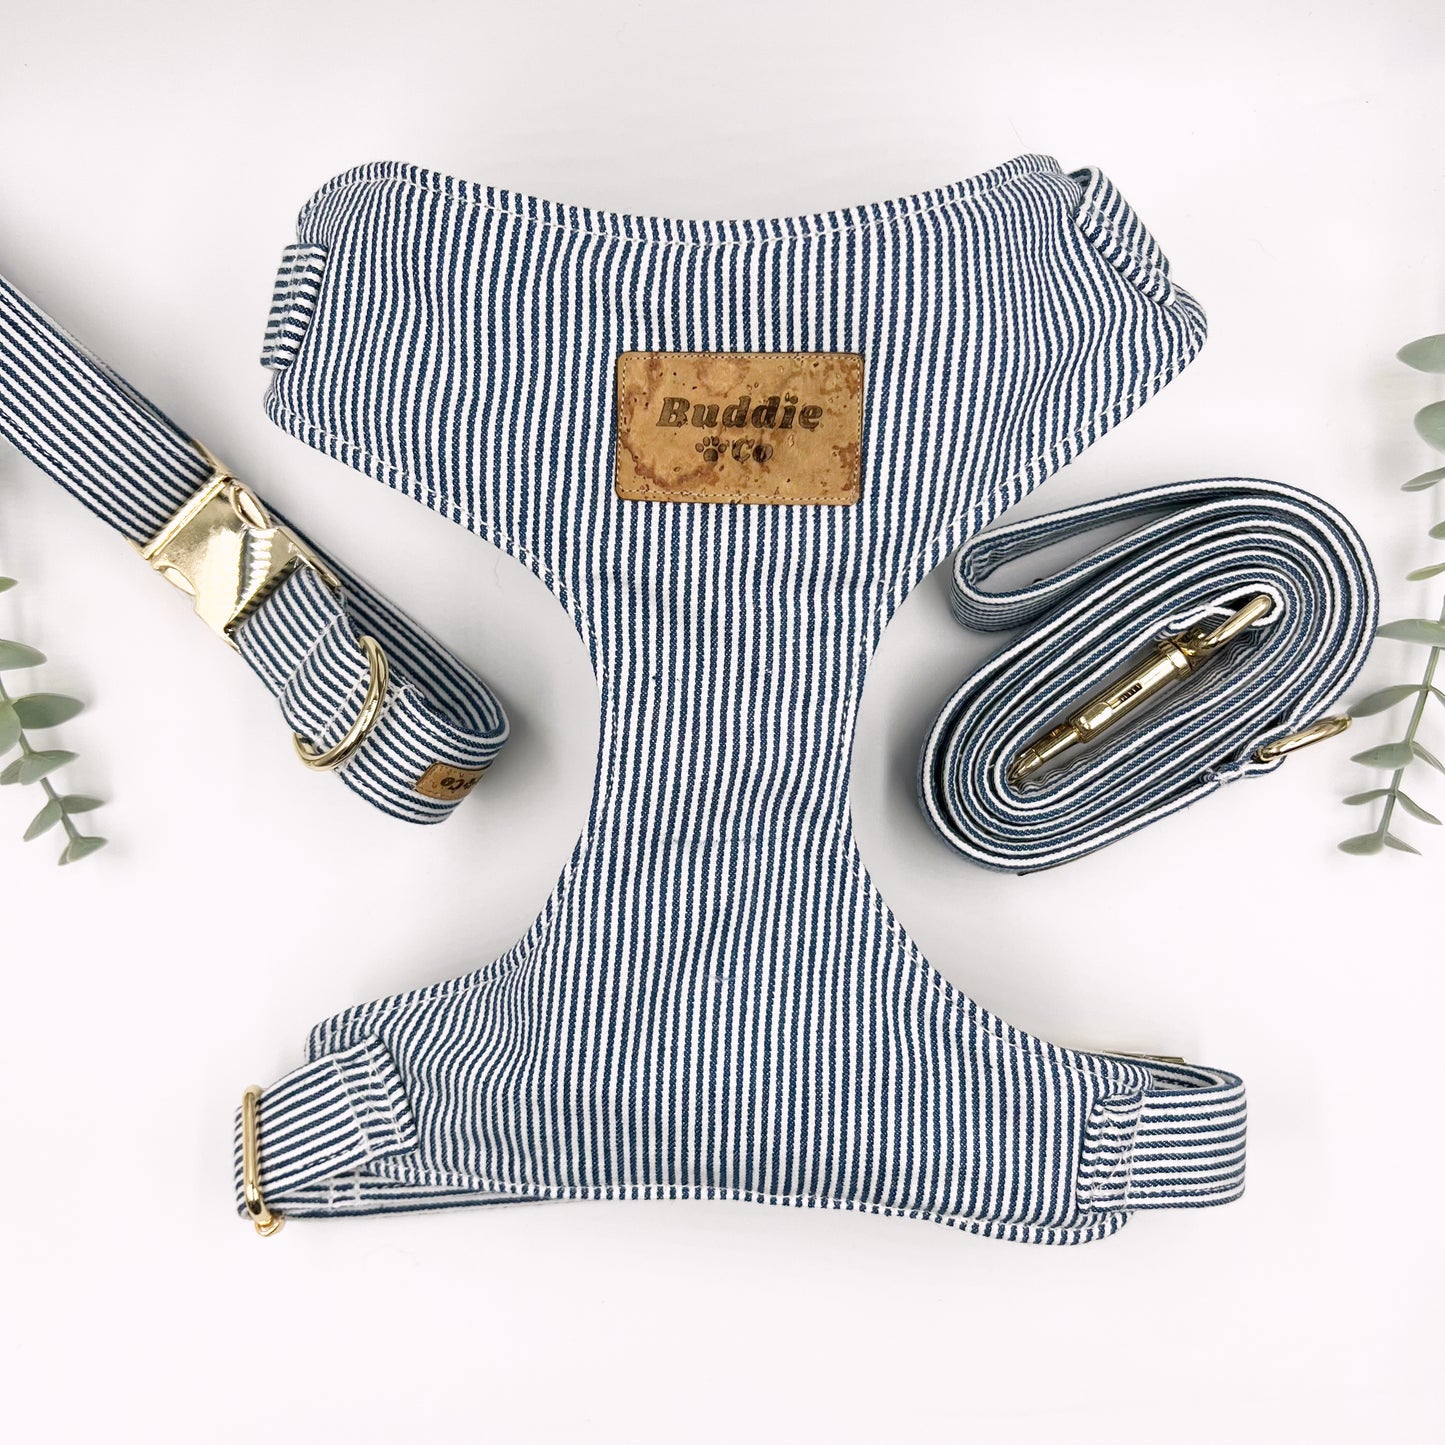 The 'George' Chest Harness Bundle